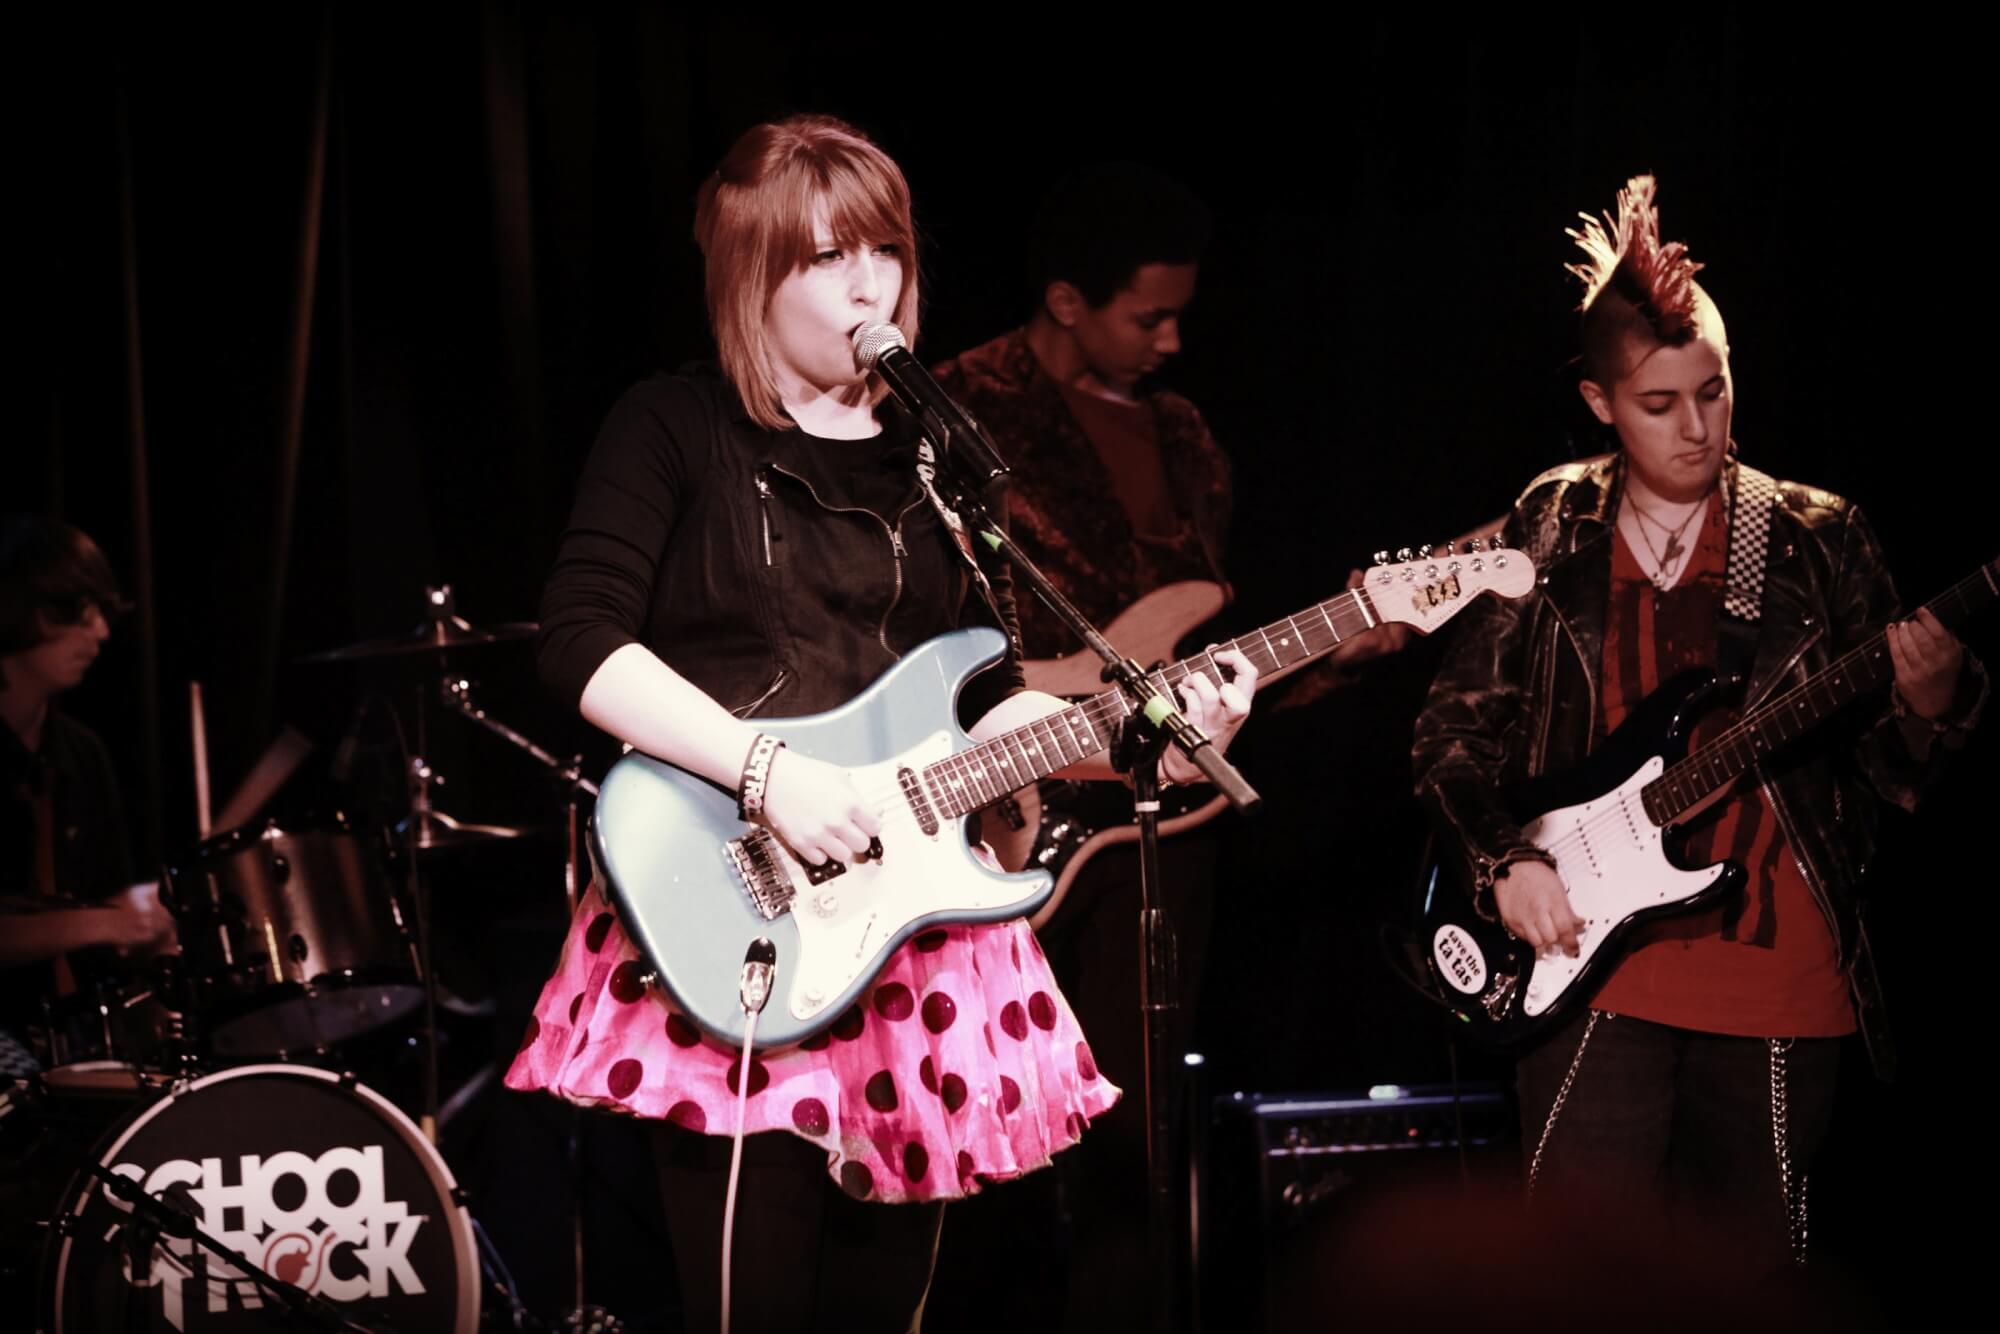 Students perform at the Whisky A Go-Go for their Season Show Performance.